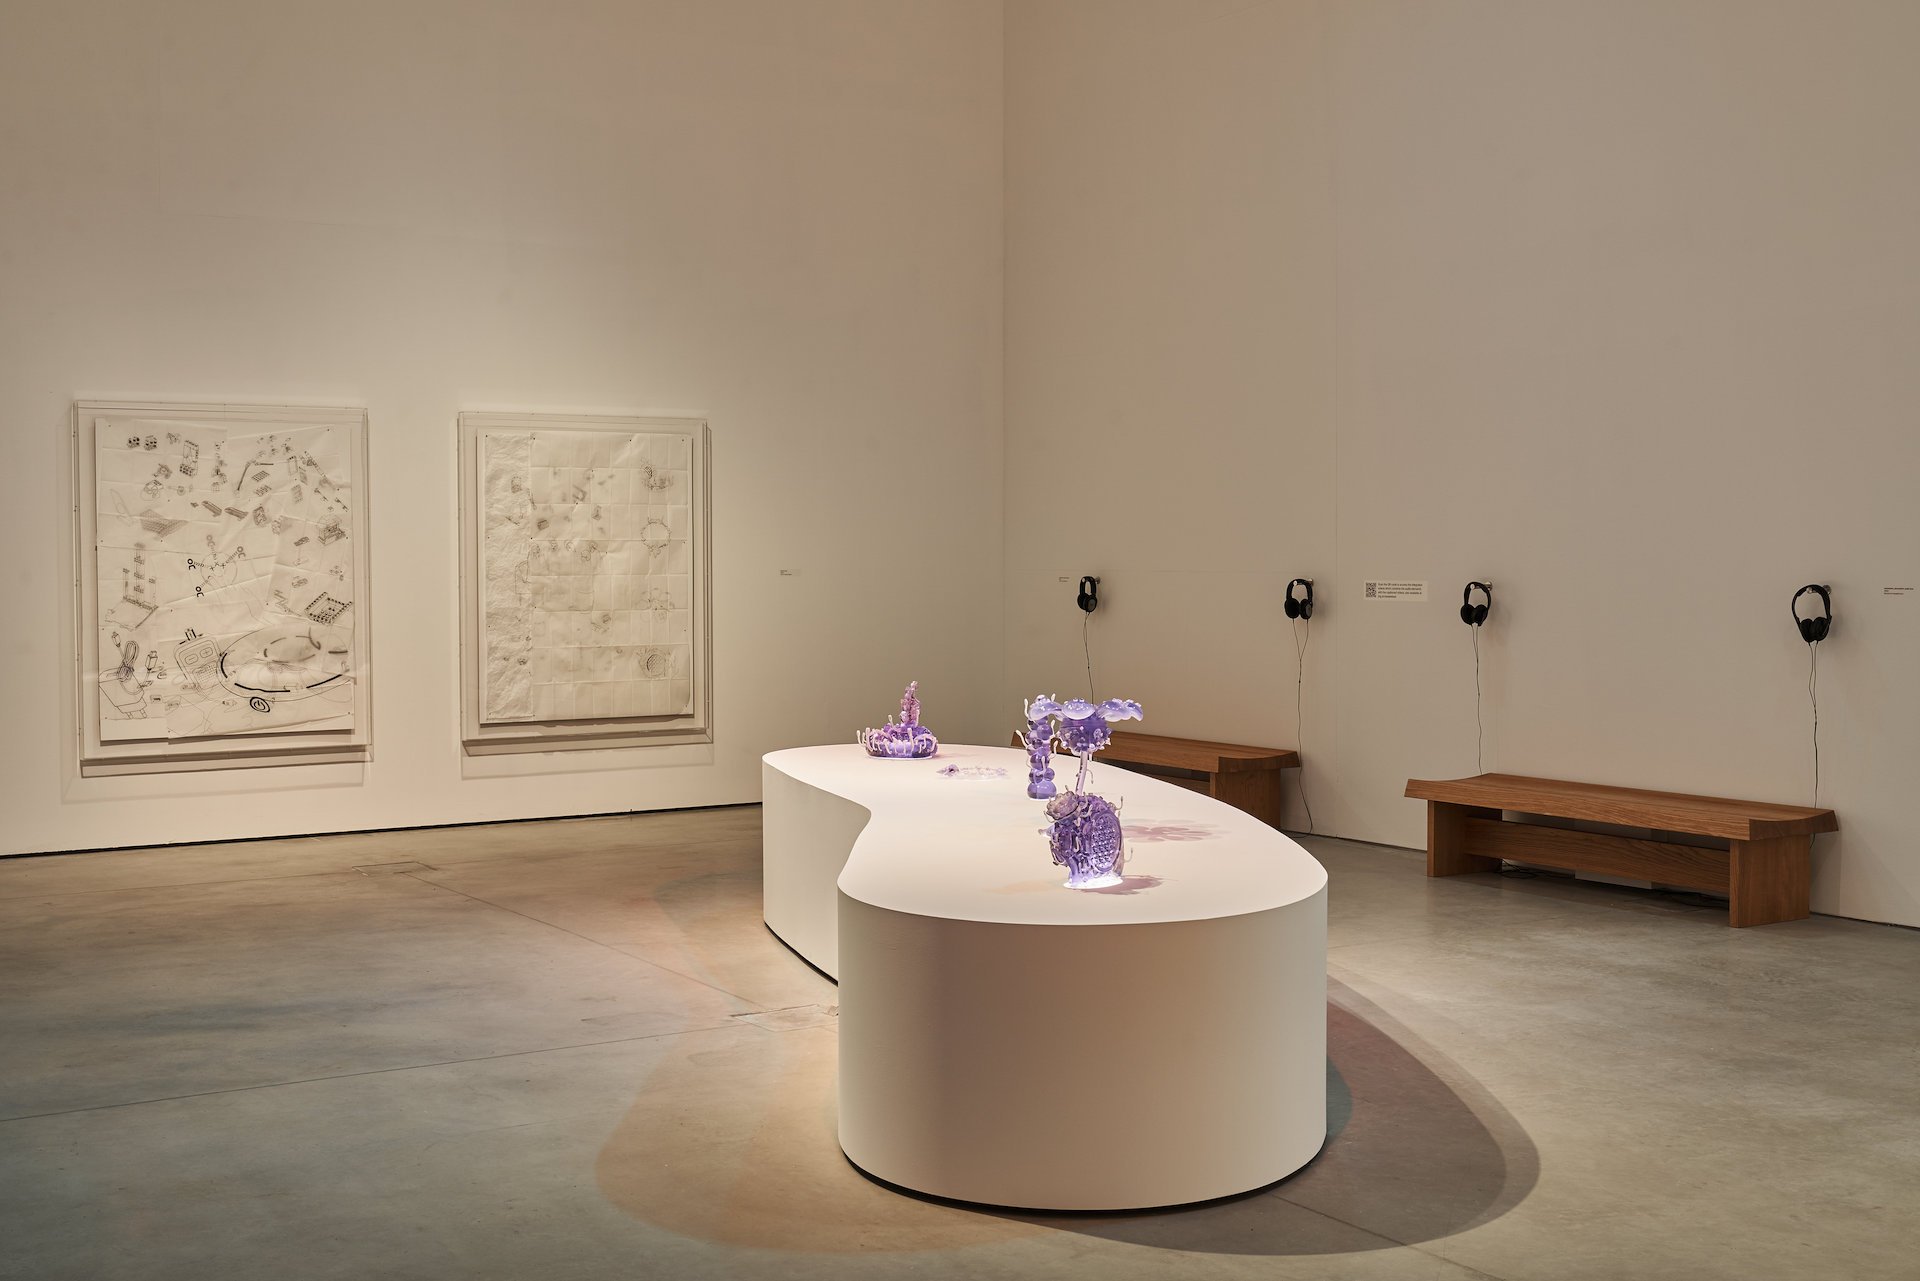  13 - A view of the  asweetsea  exhibition which shows a long, low, curved, white plinth with five purple tinted sculptures evenly spaced on top. The length of the plinth is aligned with the camera angle. Behind the plinth, on the left, are two large